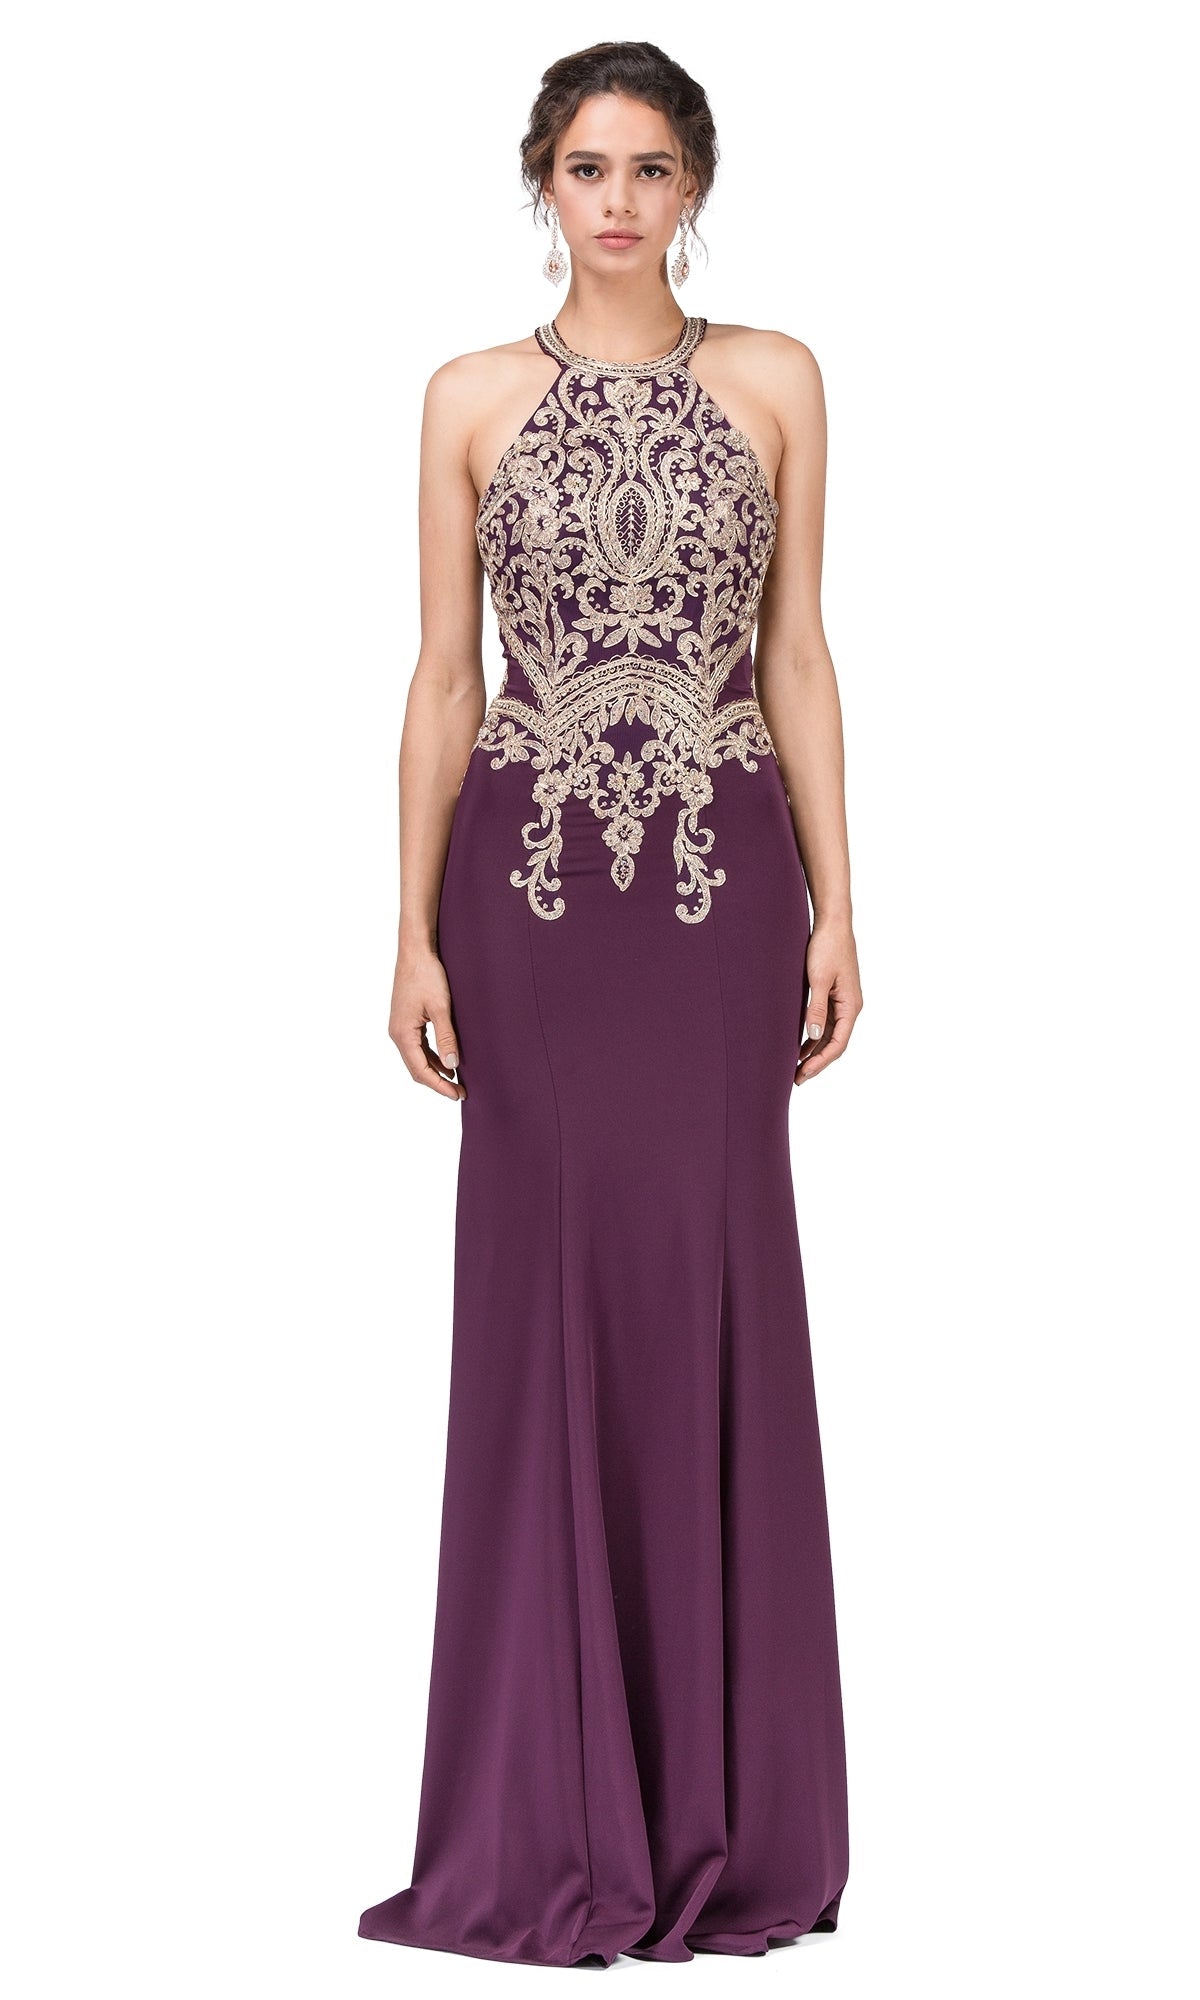 Plum High-Neck Long Formal Dresses with Gold Details